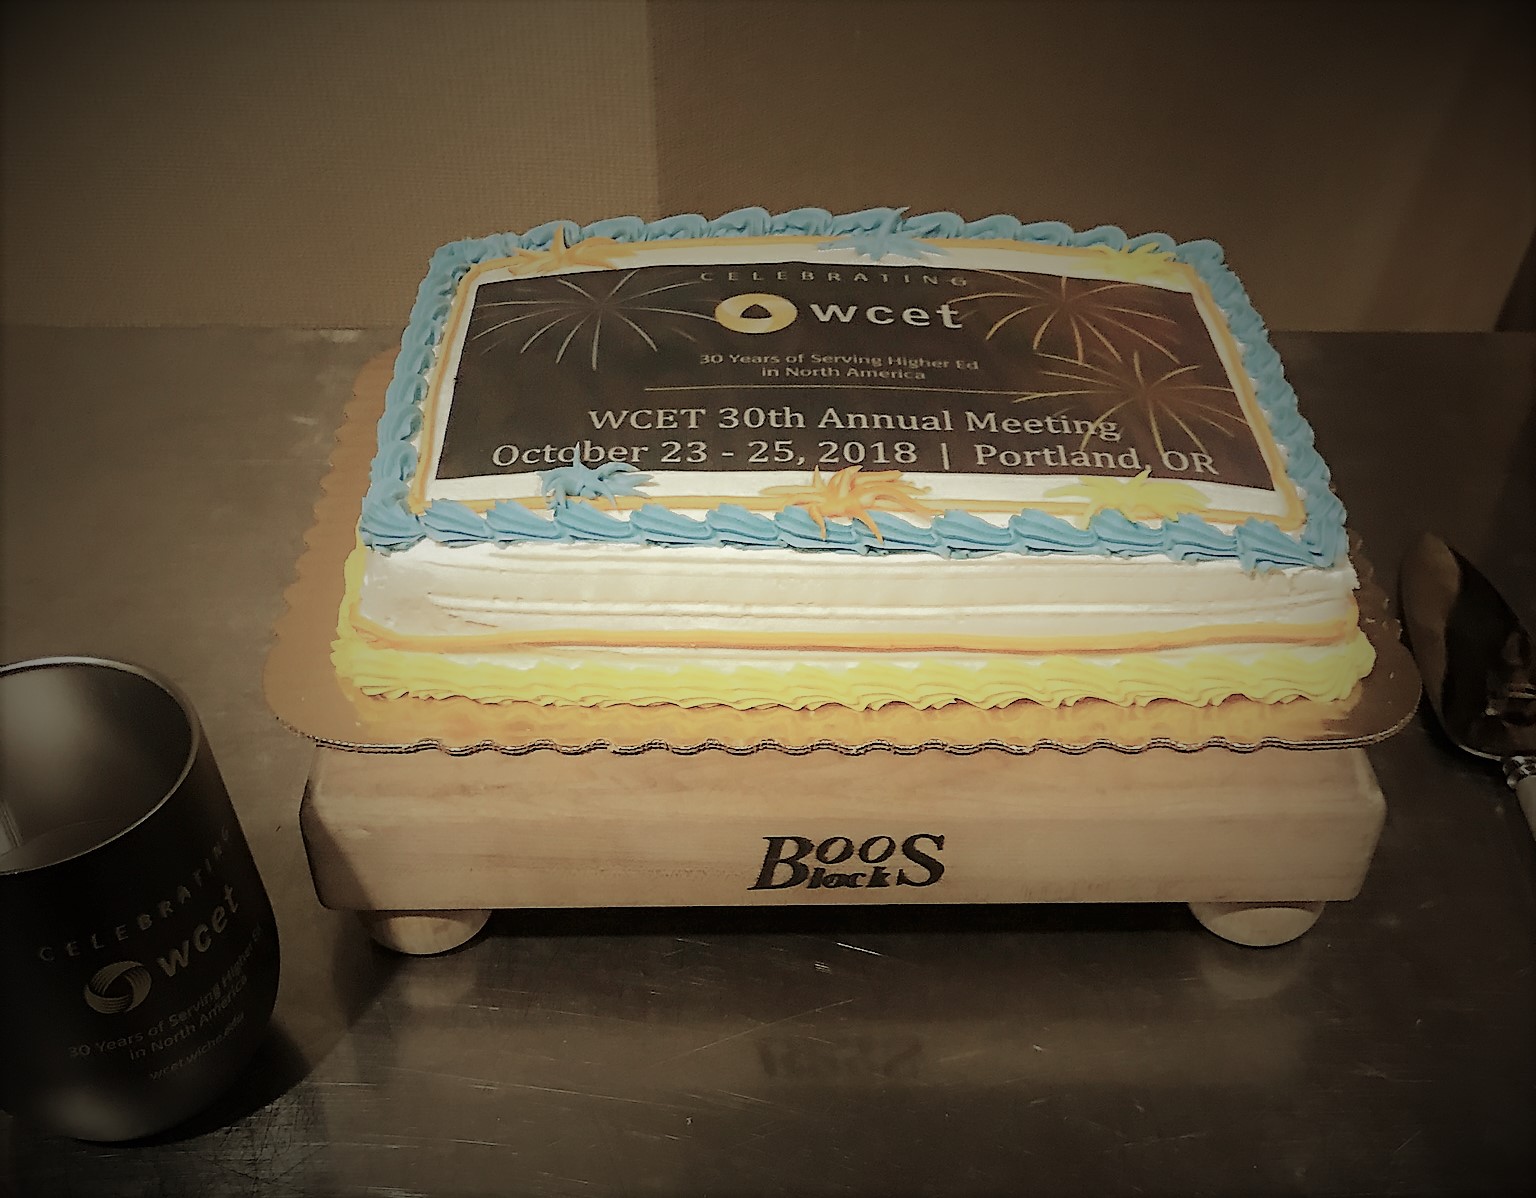 A small cake with the annual meeting logo printed on top which reads "celebrating wcetL 30 years of serving higher ed in north america. WCET annual meeting. October 23-25, 2018, Portland, OR"